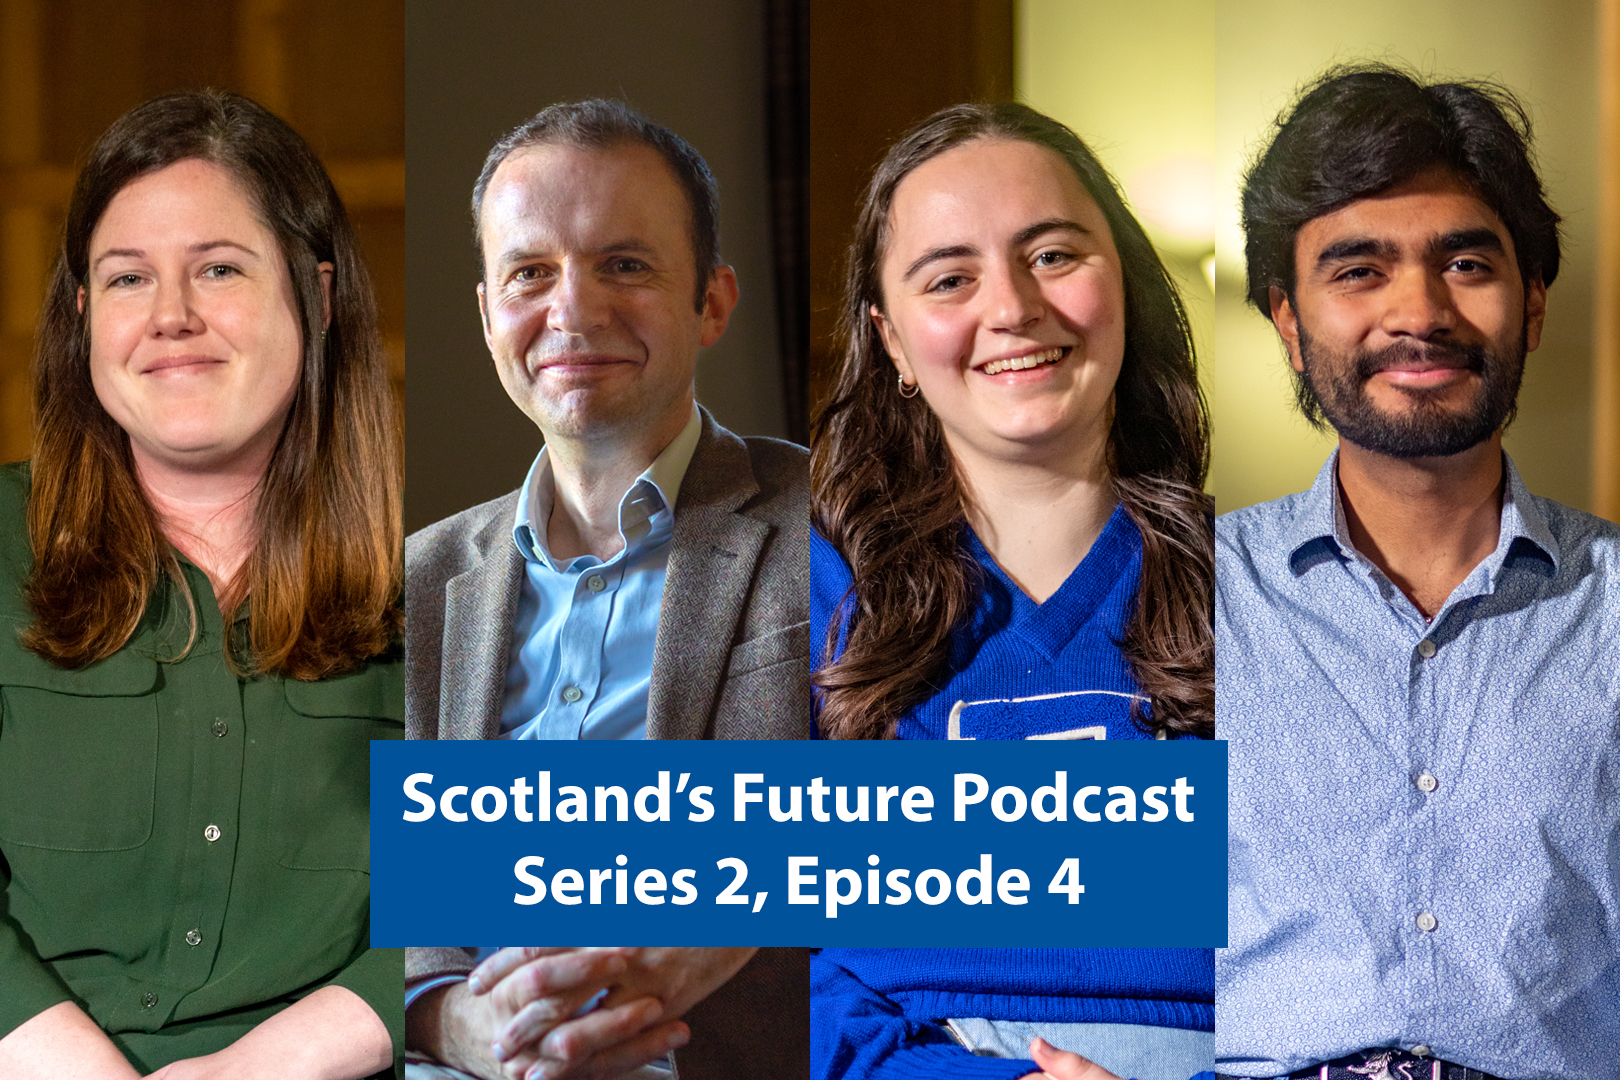 Series 2 Episode 4 – St Andrews students discuss the cost-of-living and energy crisis